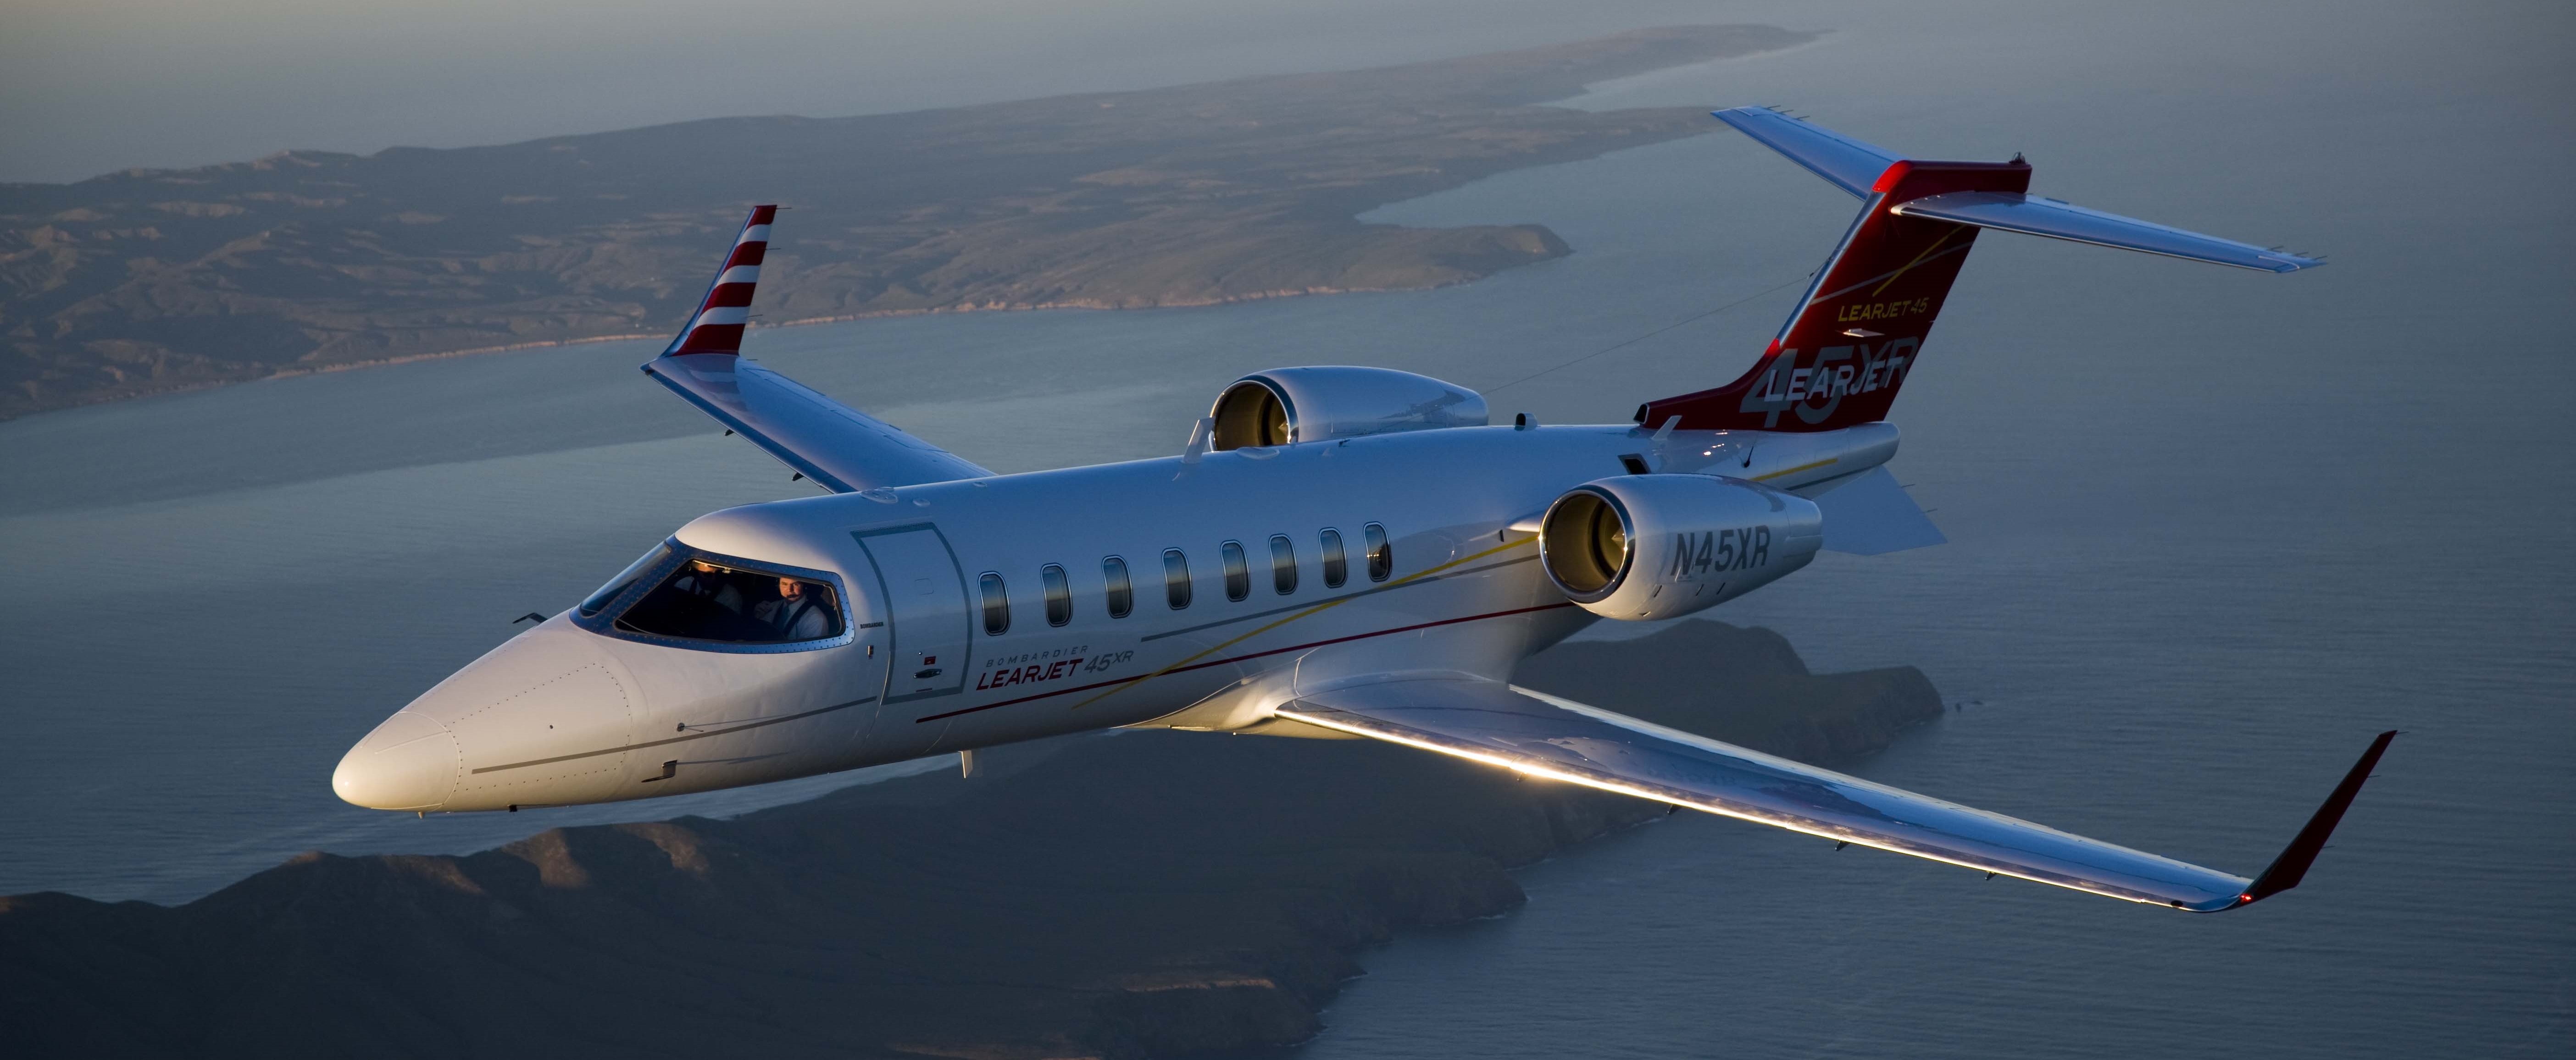 learjet, Aircraft, Airplane, Jet, Luxury Wallpapers HD ...